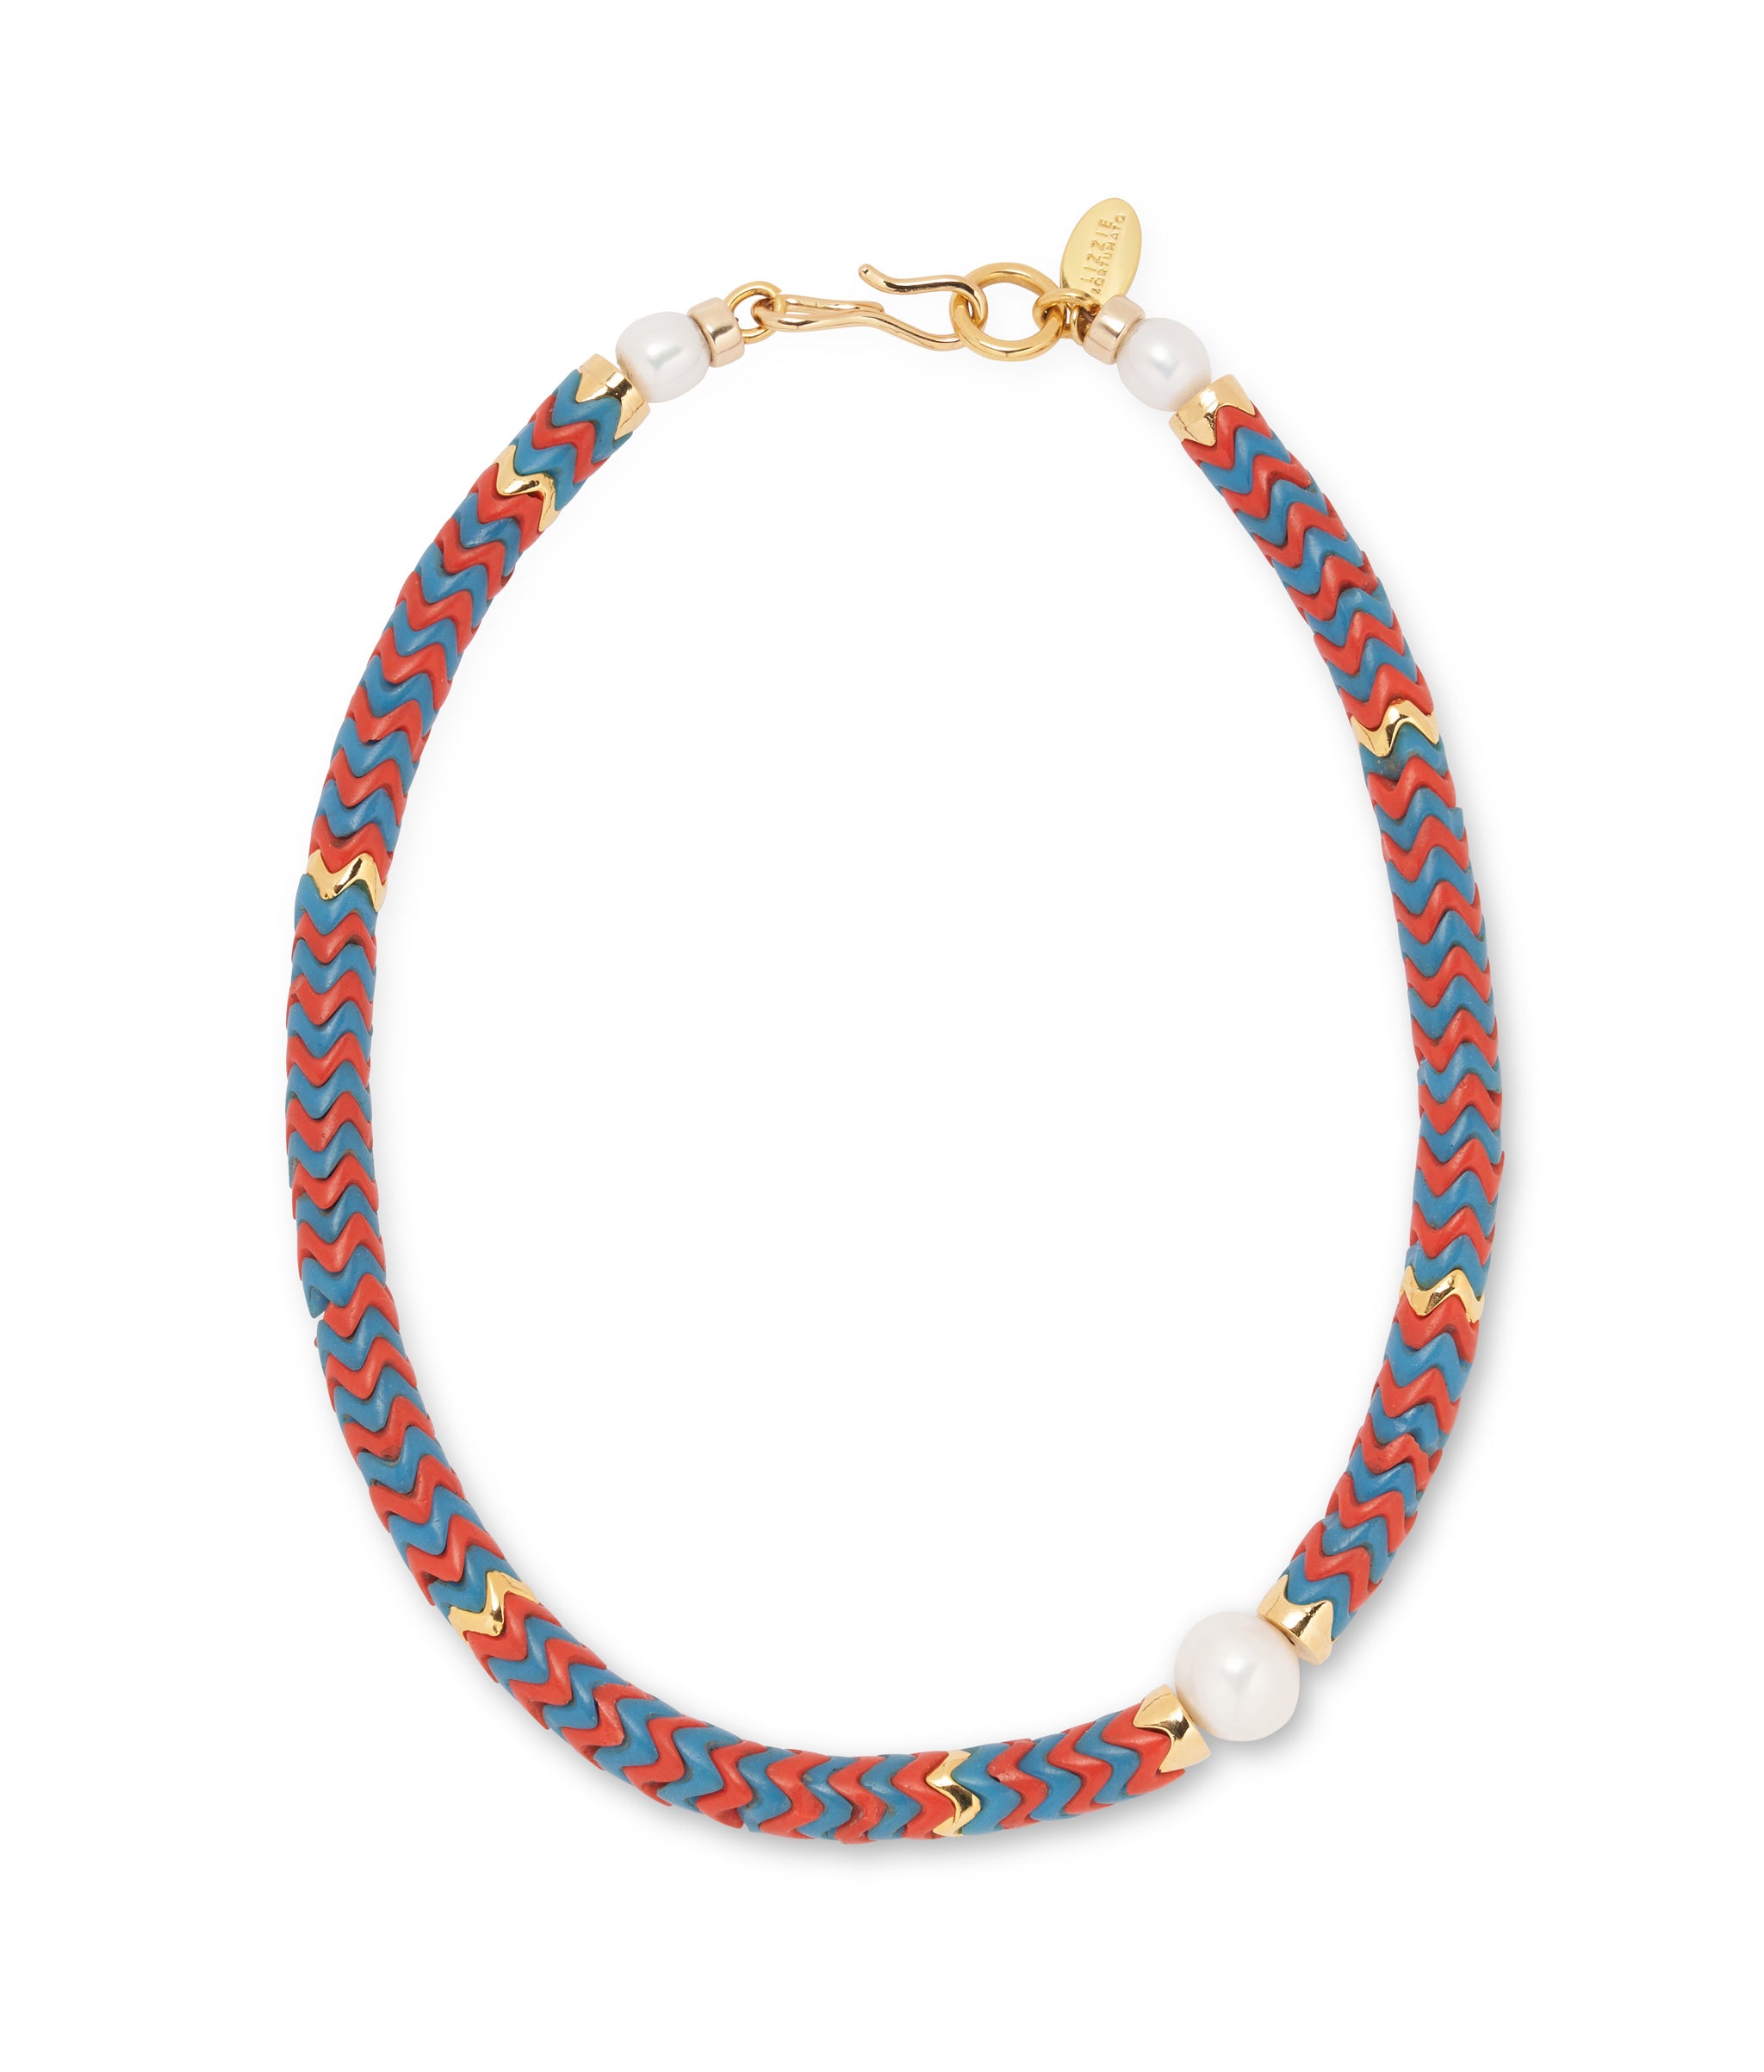 Painted Coast Necklace in Firework. Single strand of interlocking wavy glass beads in red and blue with pearl accents.